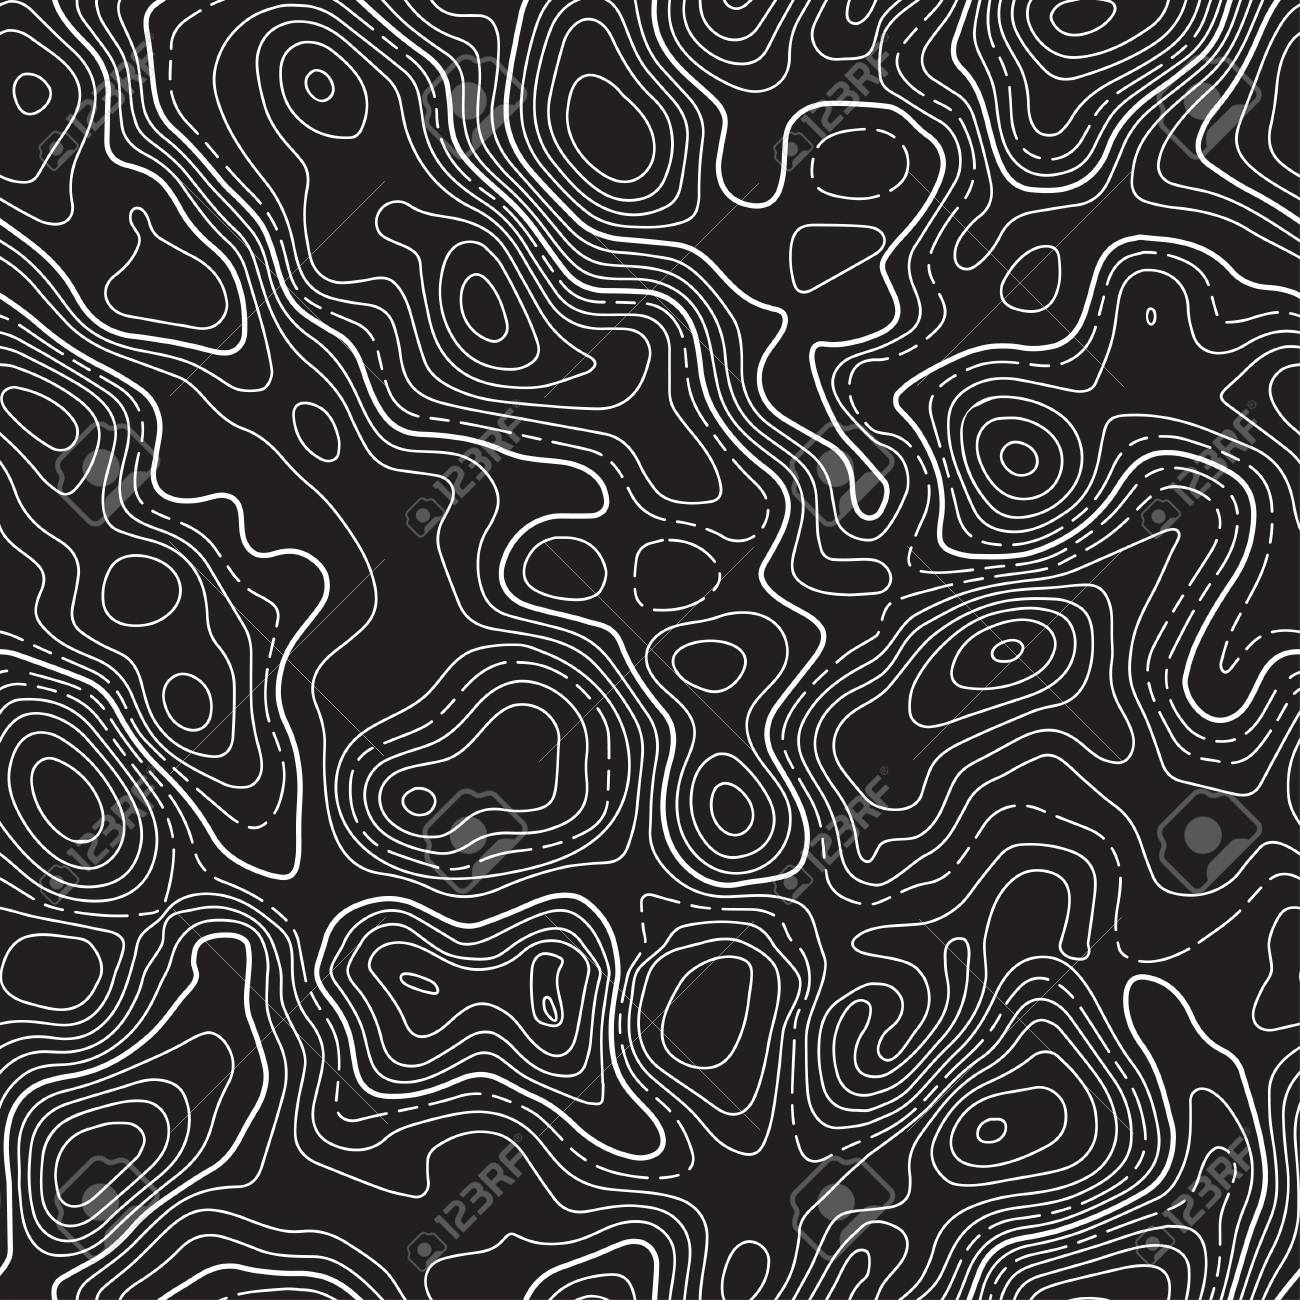 List 99 Wallpaper Black And White Topographic Wallpaper Completed 8493